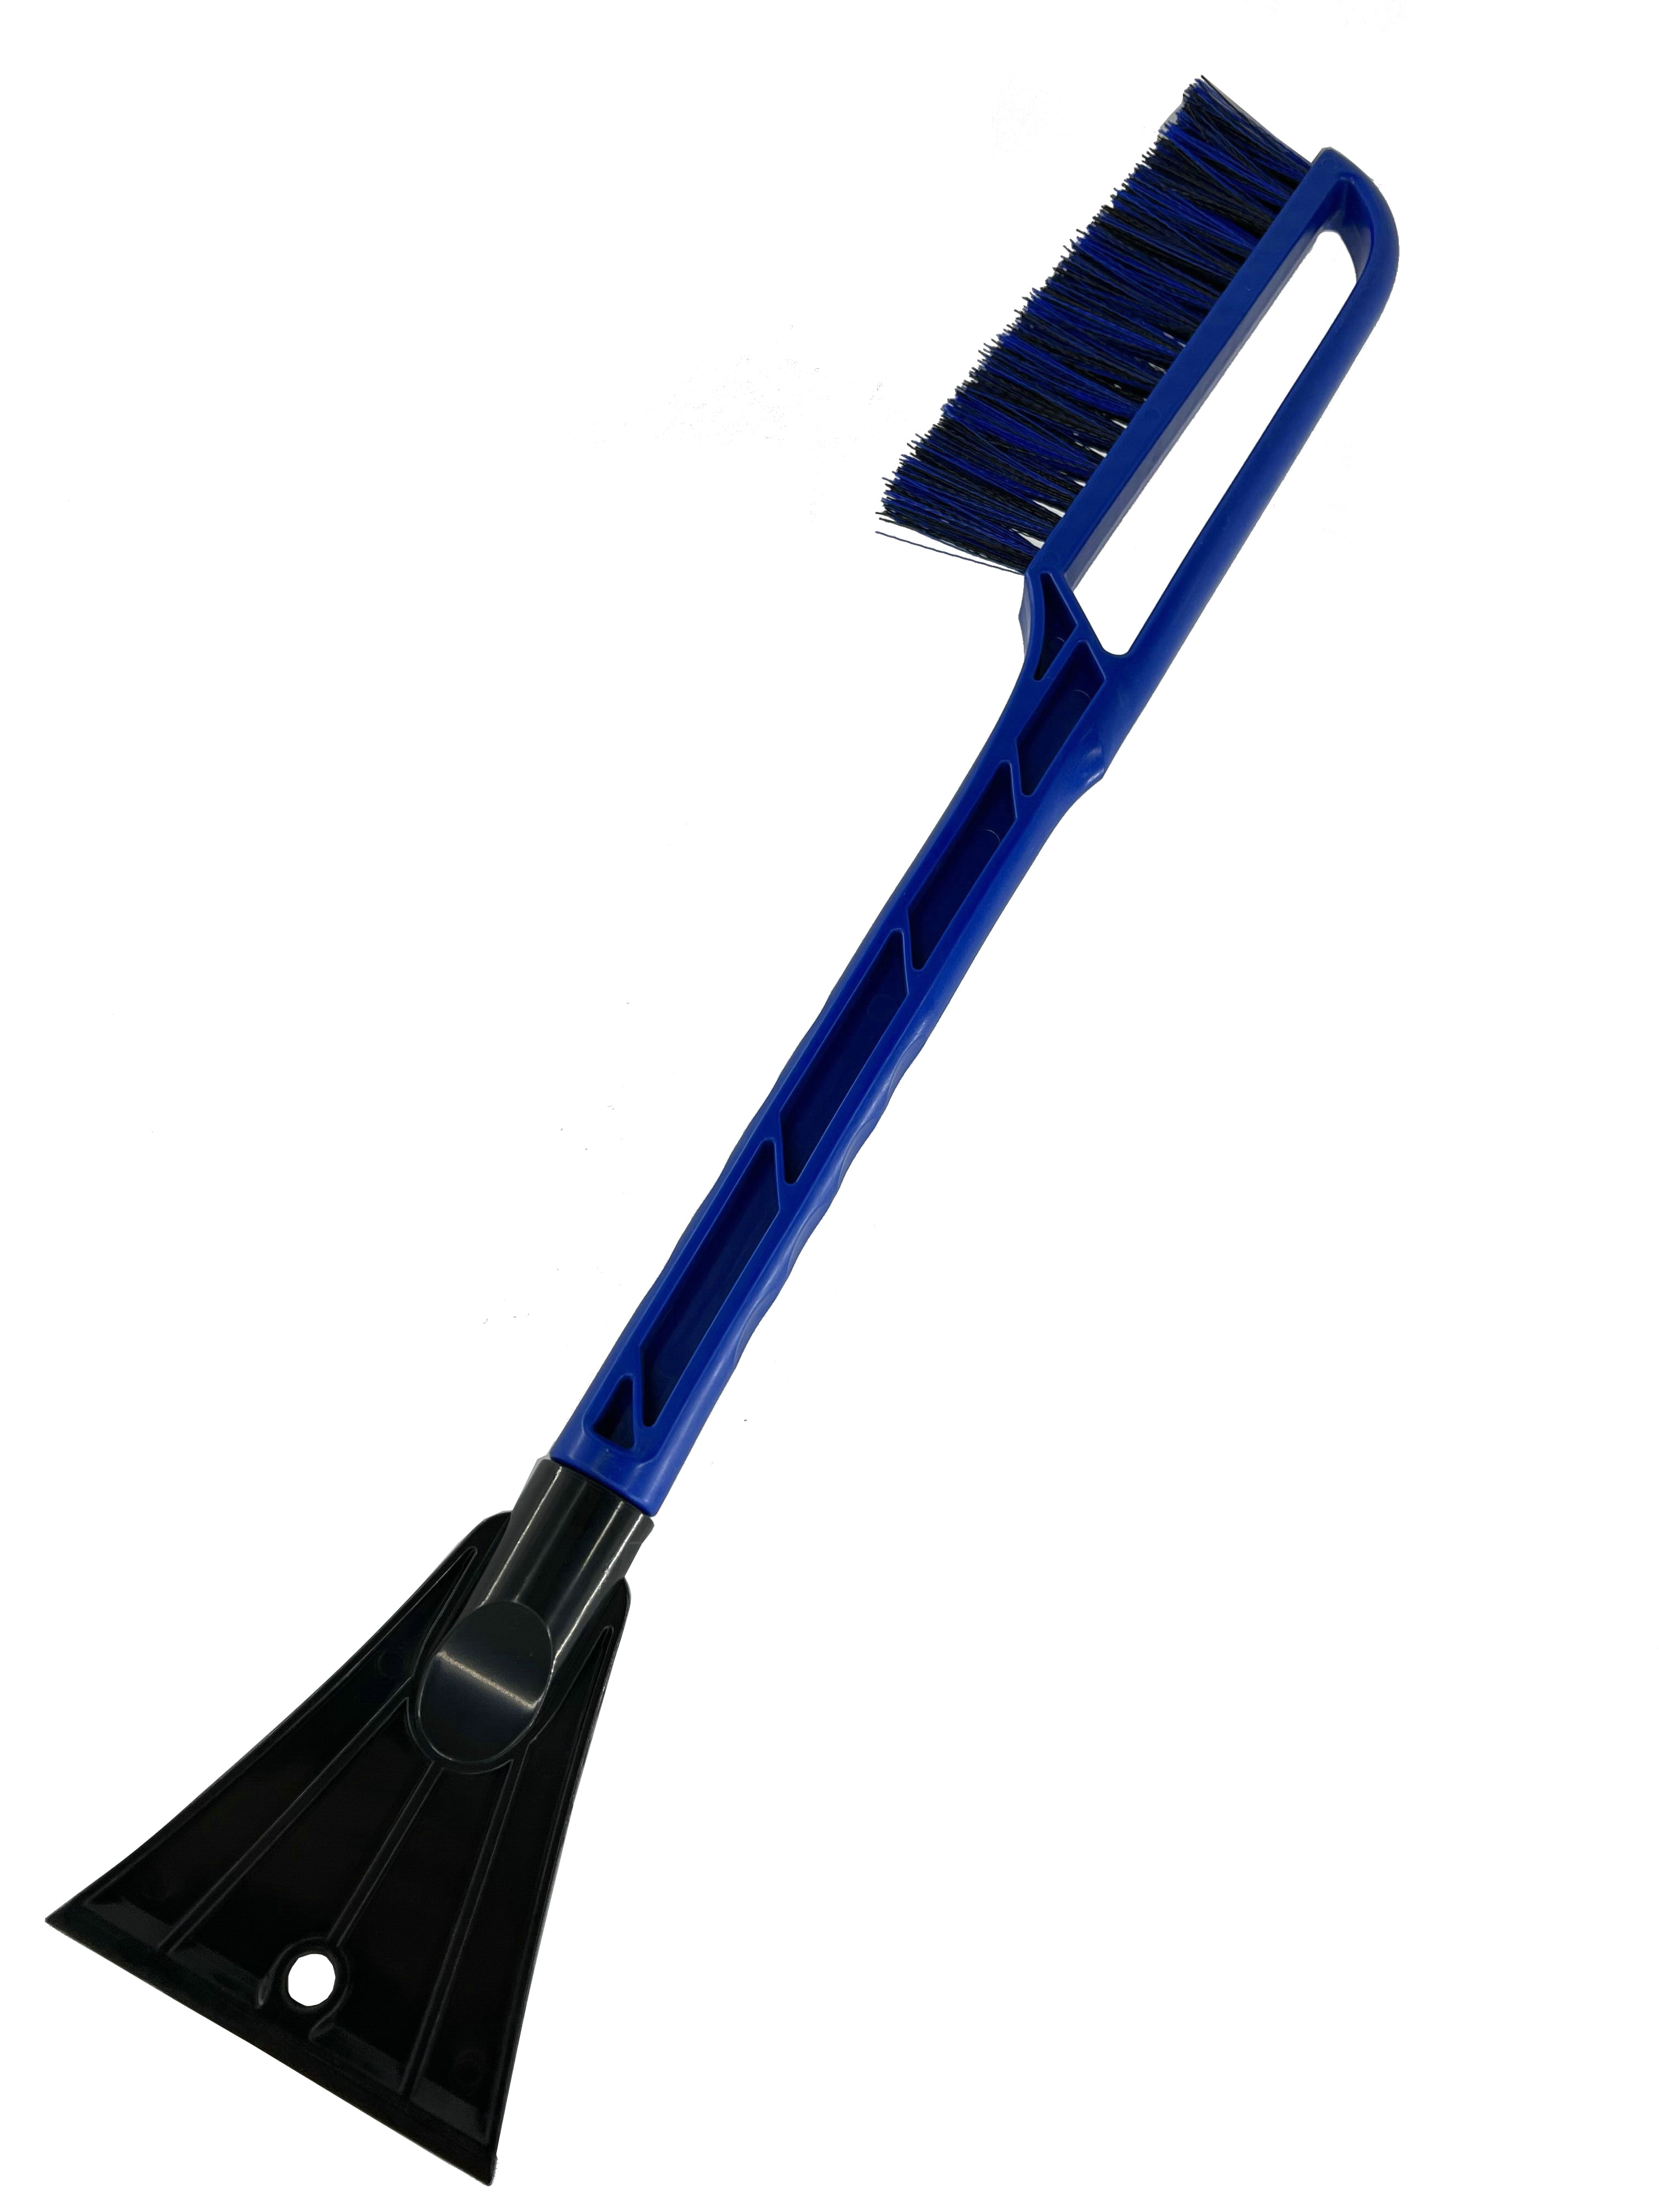 Auto Drive 24 inch Winter Driving Snow Brush and Ice Scraper, Product Size  24 x 4 x 1.4. Blue 